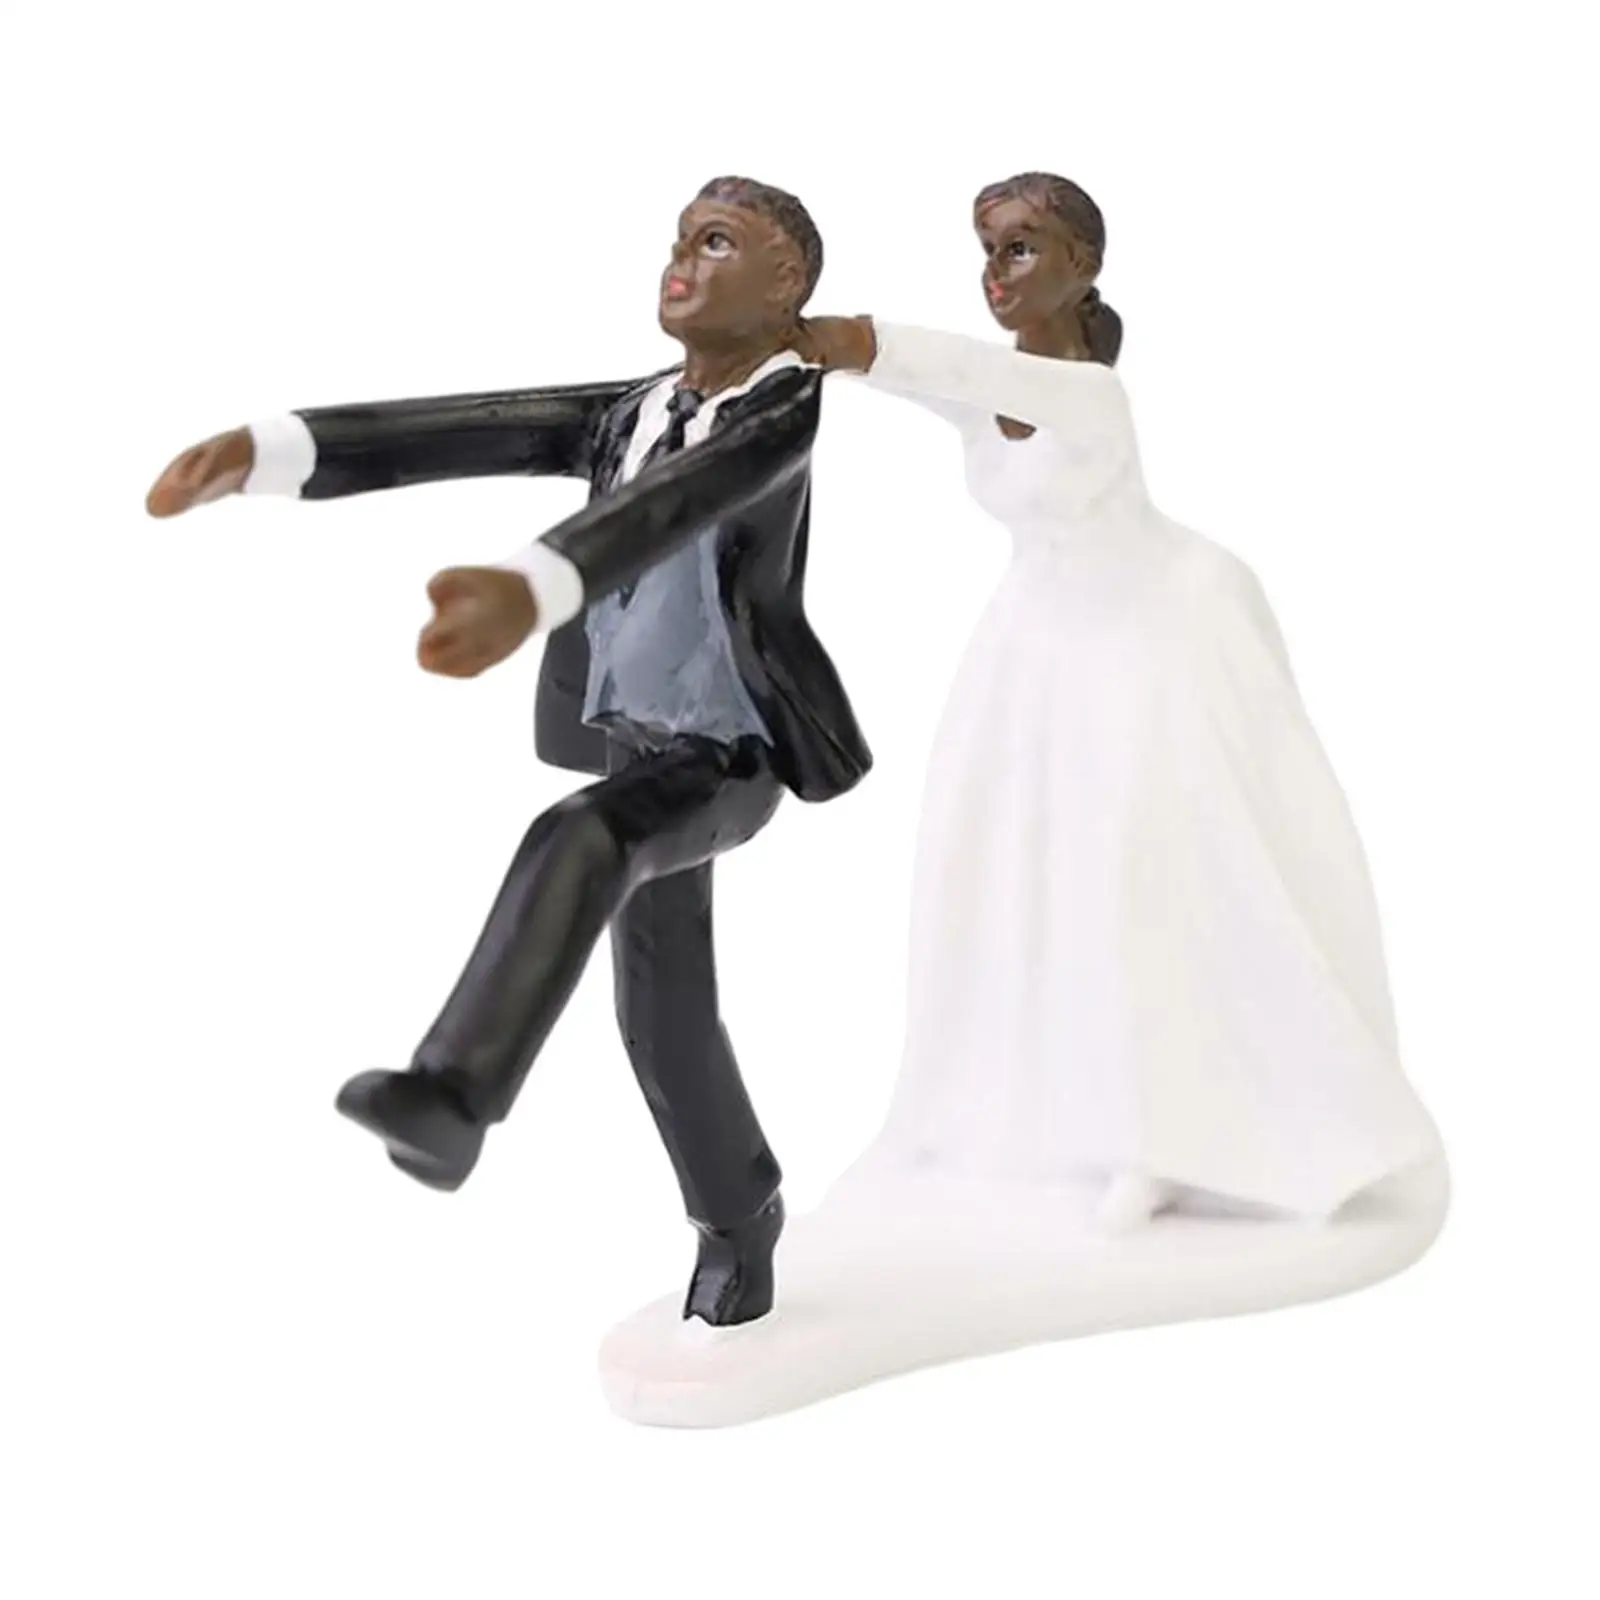 Wedding Cake Dolls Modern Resin Gift Couple Figures Cute Bride and Groom Statues for Party Engagement Valentine Wedding